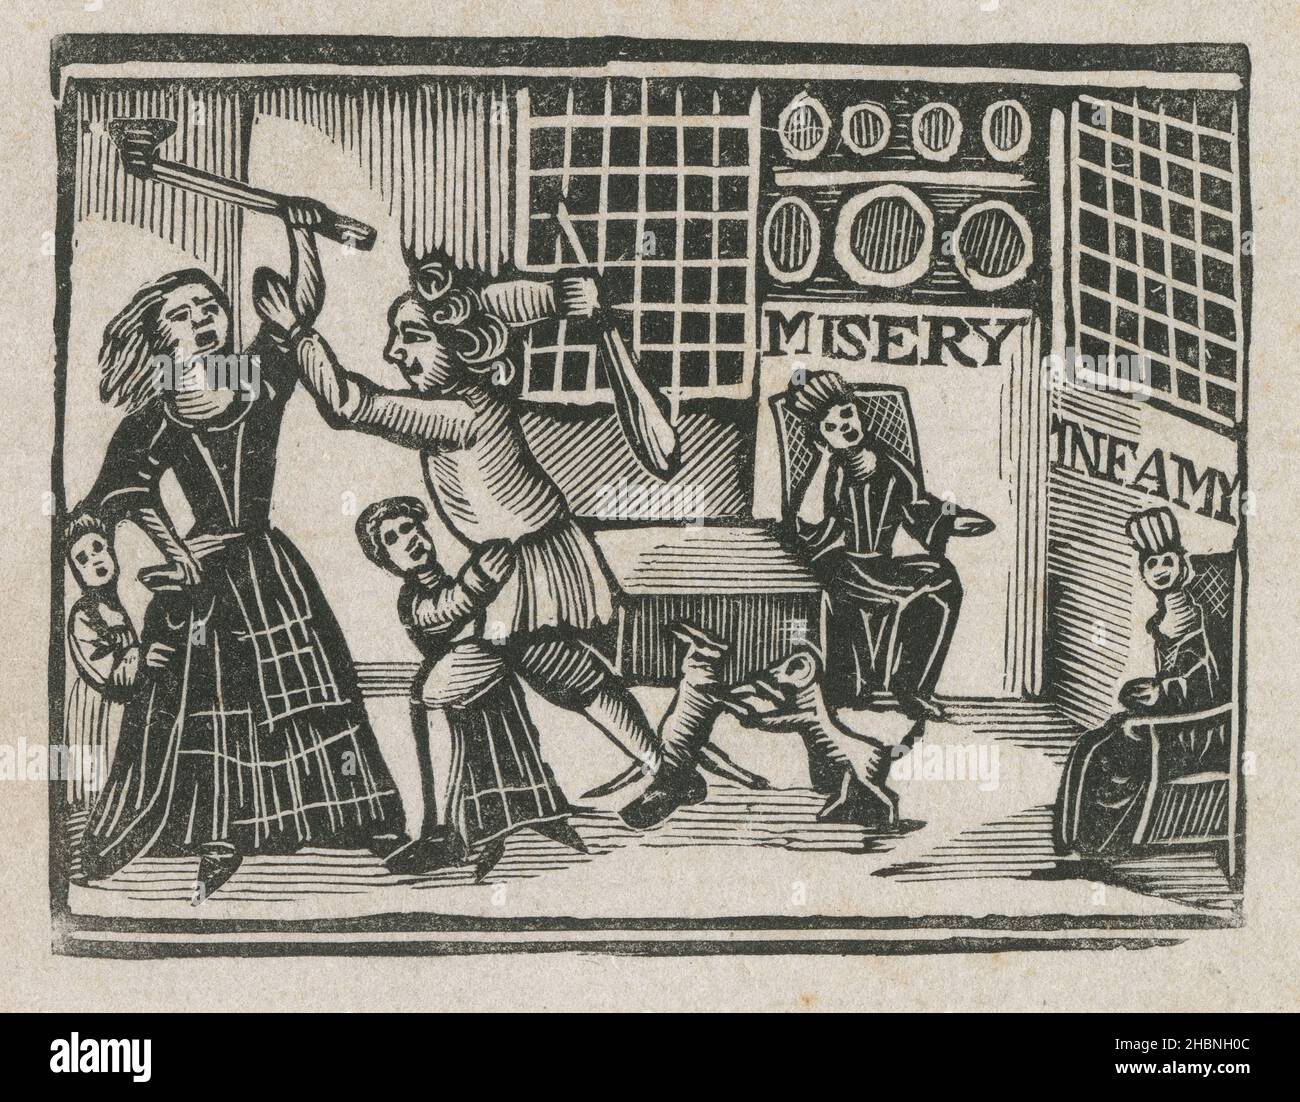 Antique 19th century woodcut engraving, 'Daughter of Riches and Her Husband Quarreling' depicting Miss Delicacy fighting with her husband, reproduced from 'The Pious Youth's Recreation; containing a pleasant historical relation of the families of Riches and Poverty, Godliness and Labor' (1711). SOURCE: ORIGINAL ENGRAVING Stock Photo